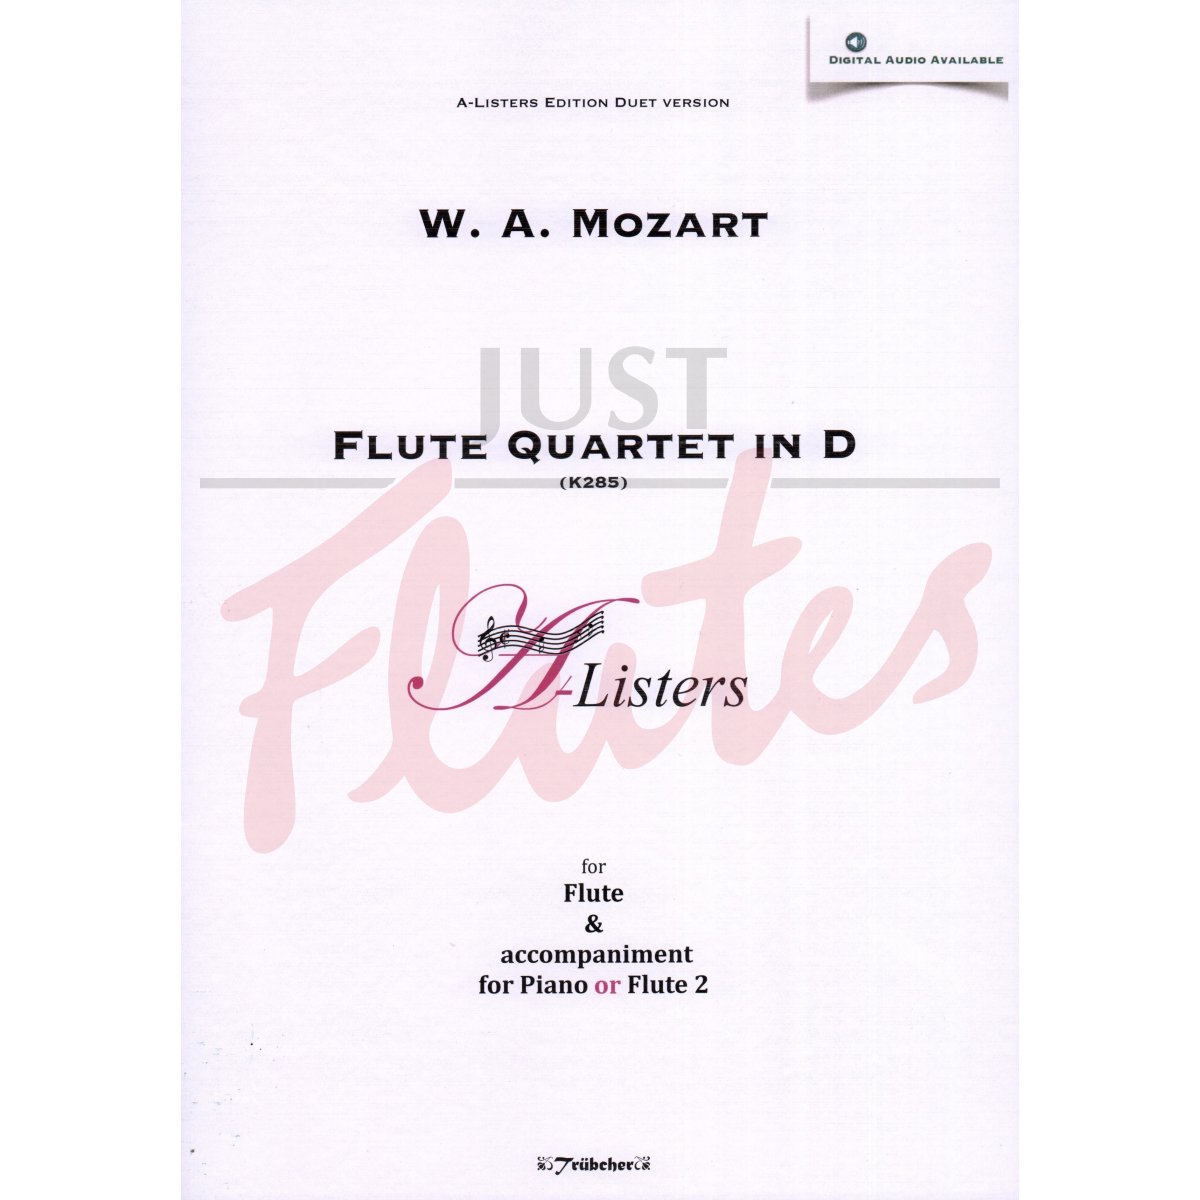 Flute Quartet No 1 in D major for Flute and Piano (or Two Flutes)